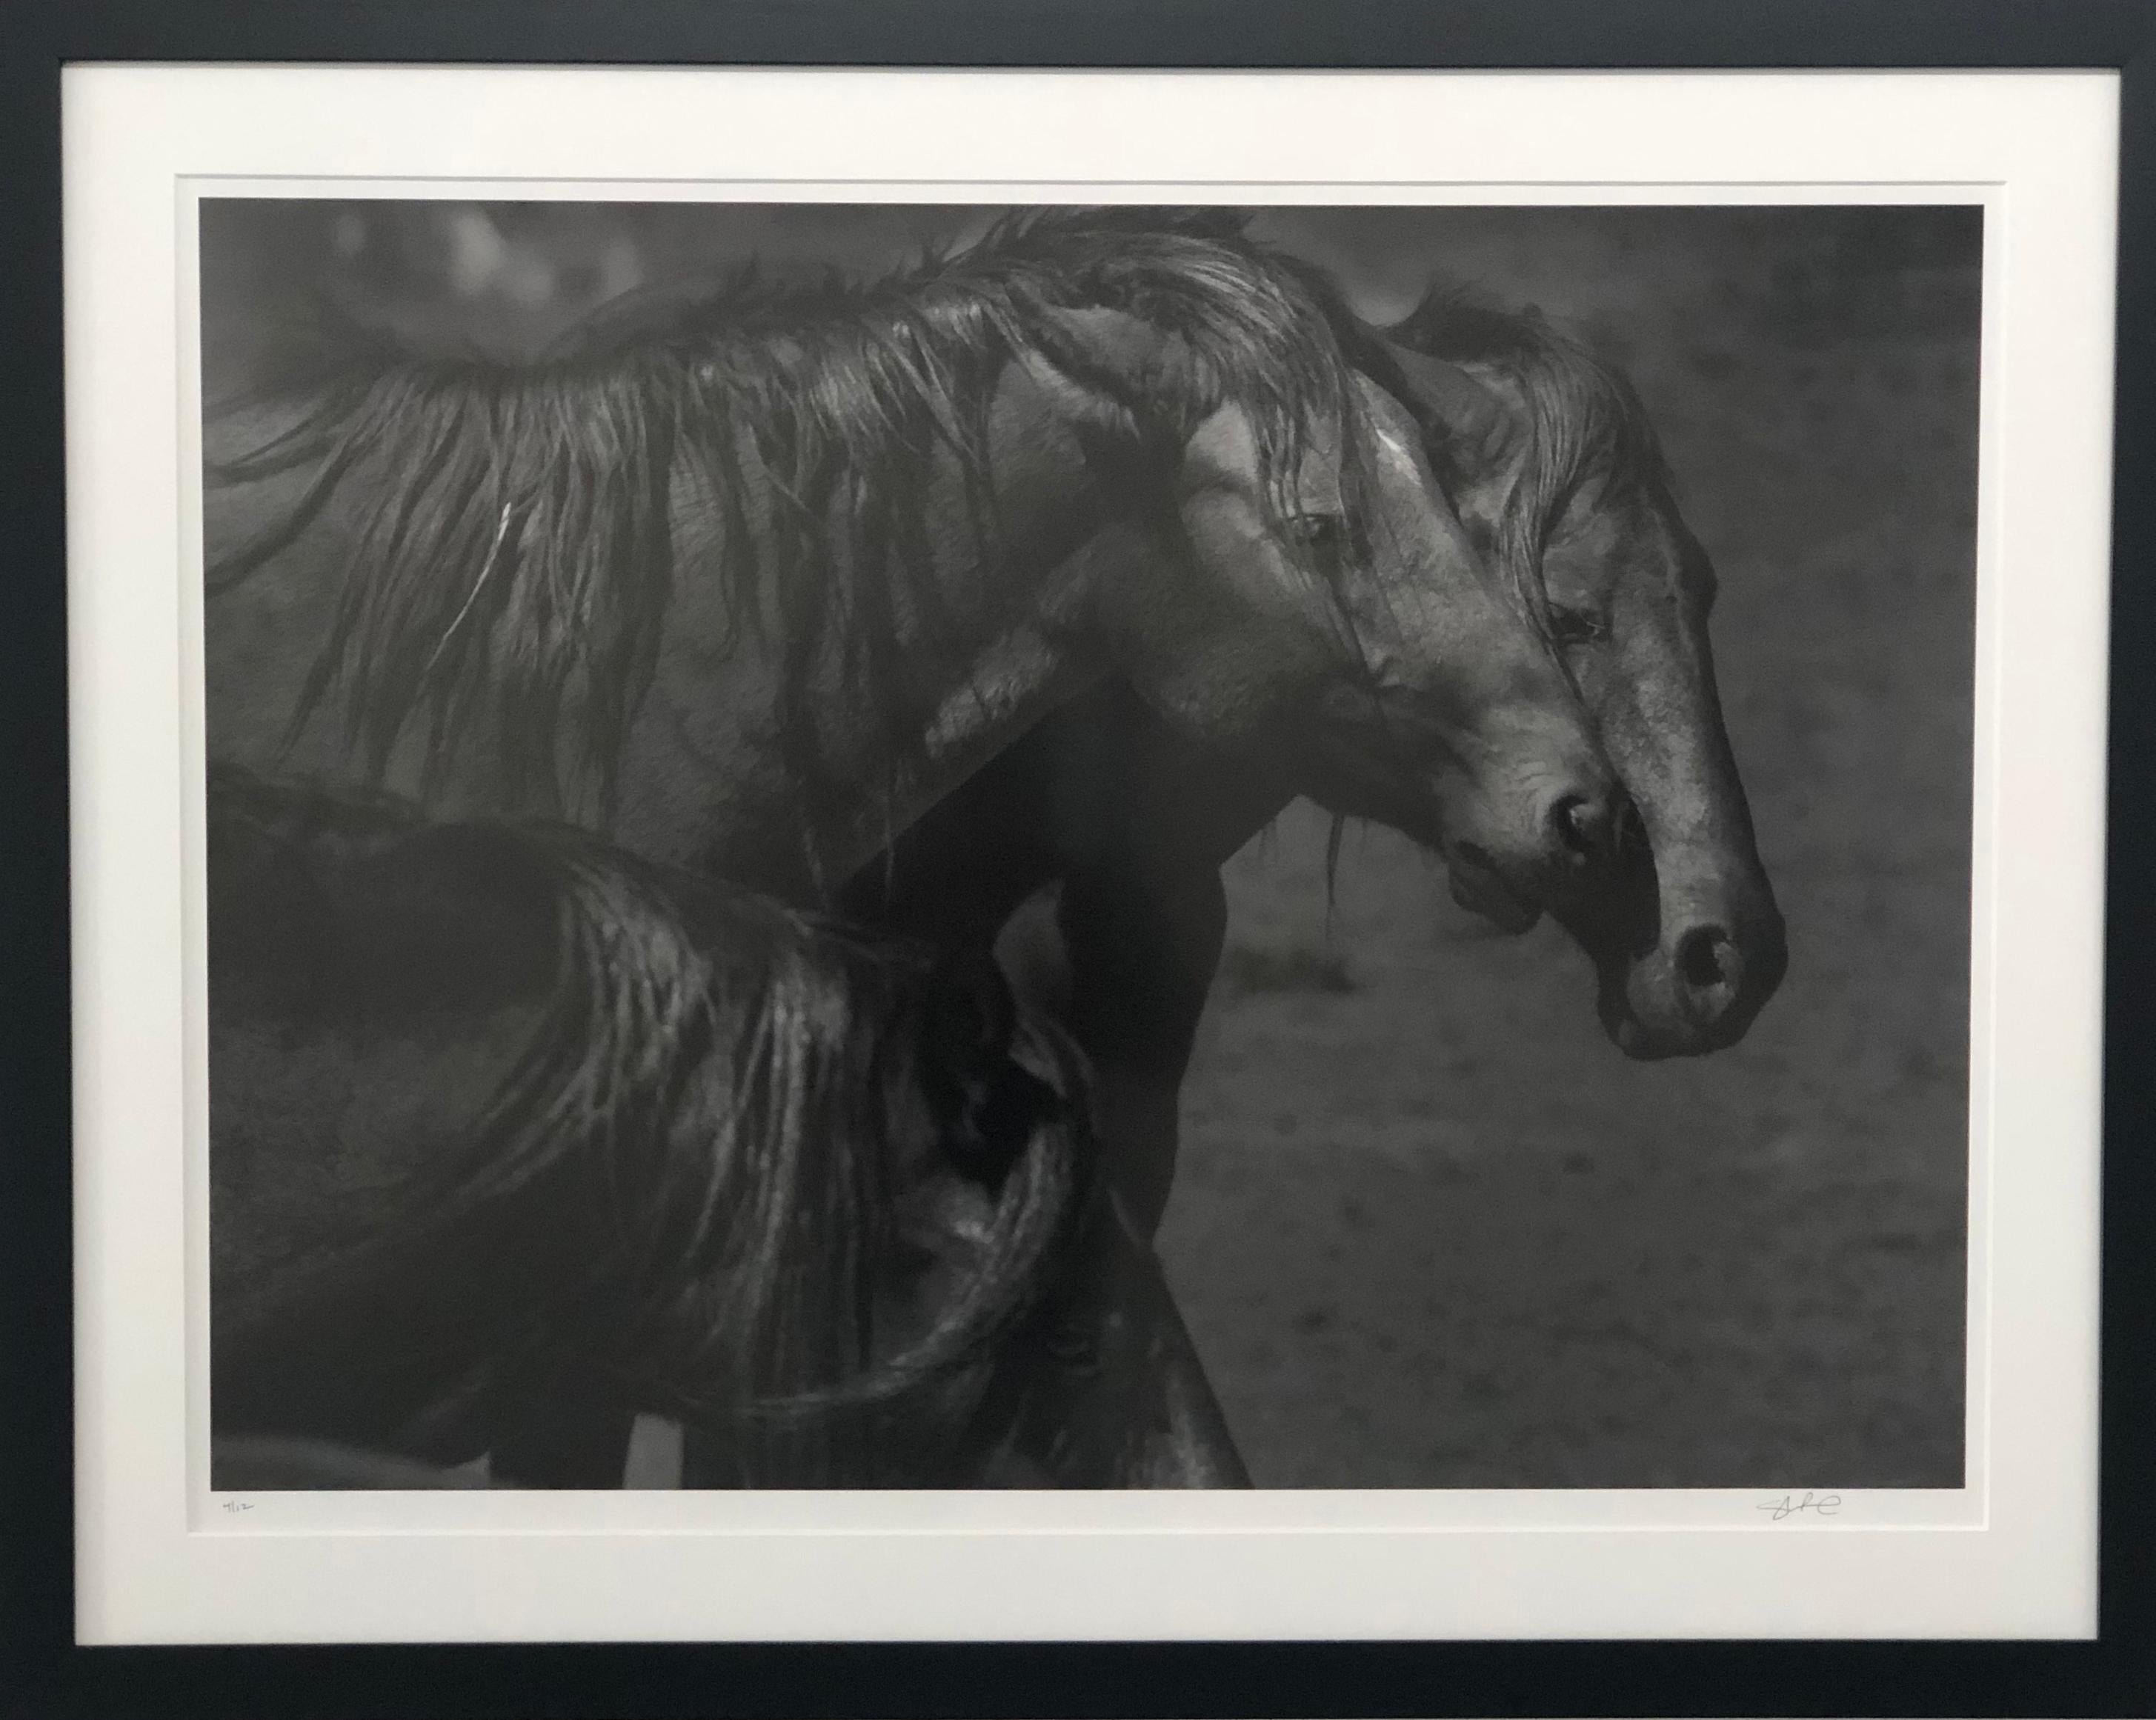 The Good the Bad and The Ugly 36x48 - Contemporary  of Wild Horses - Photograph by Shane Russeck